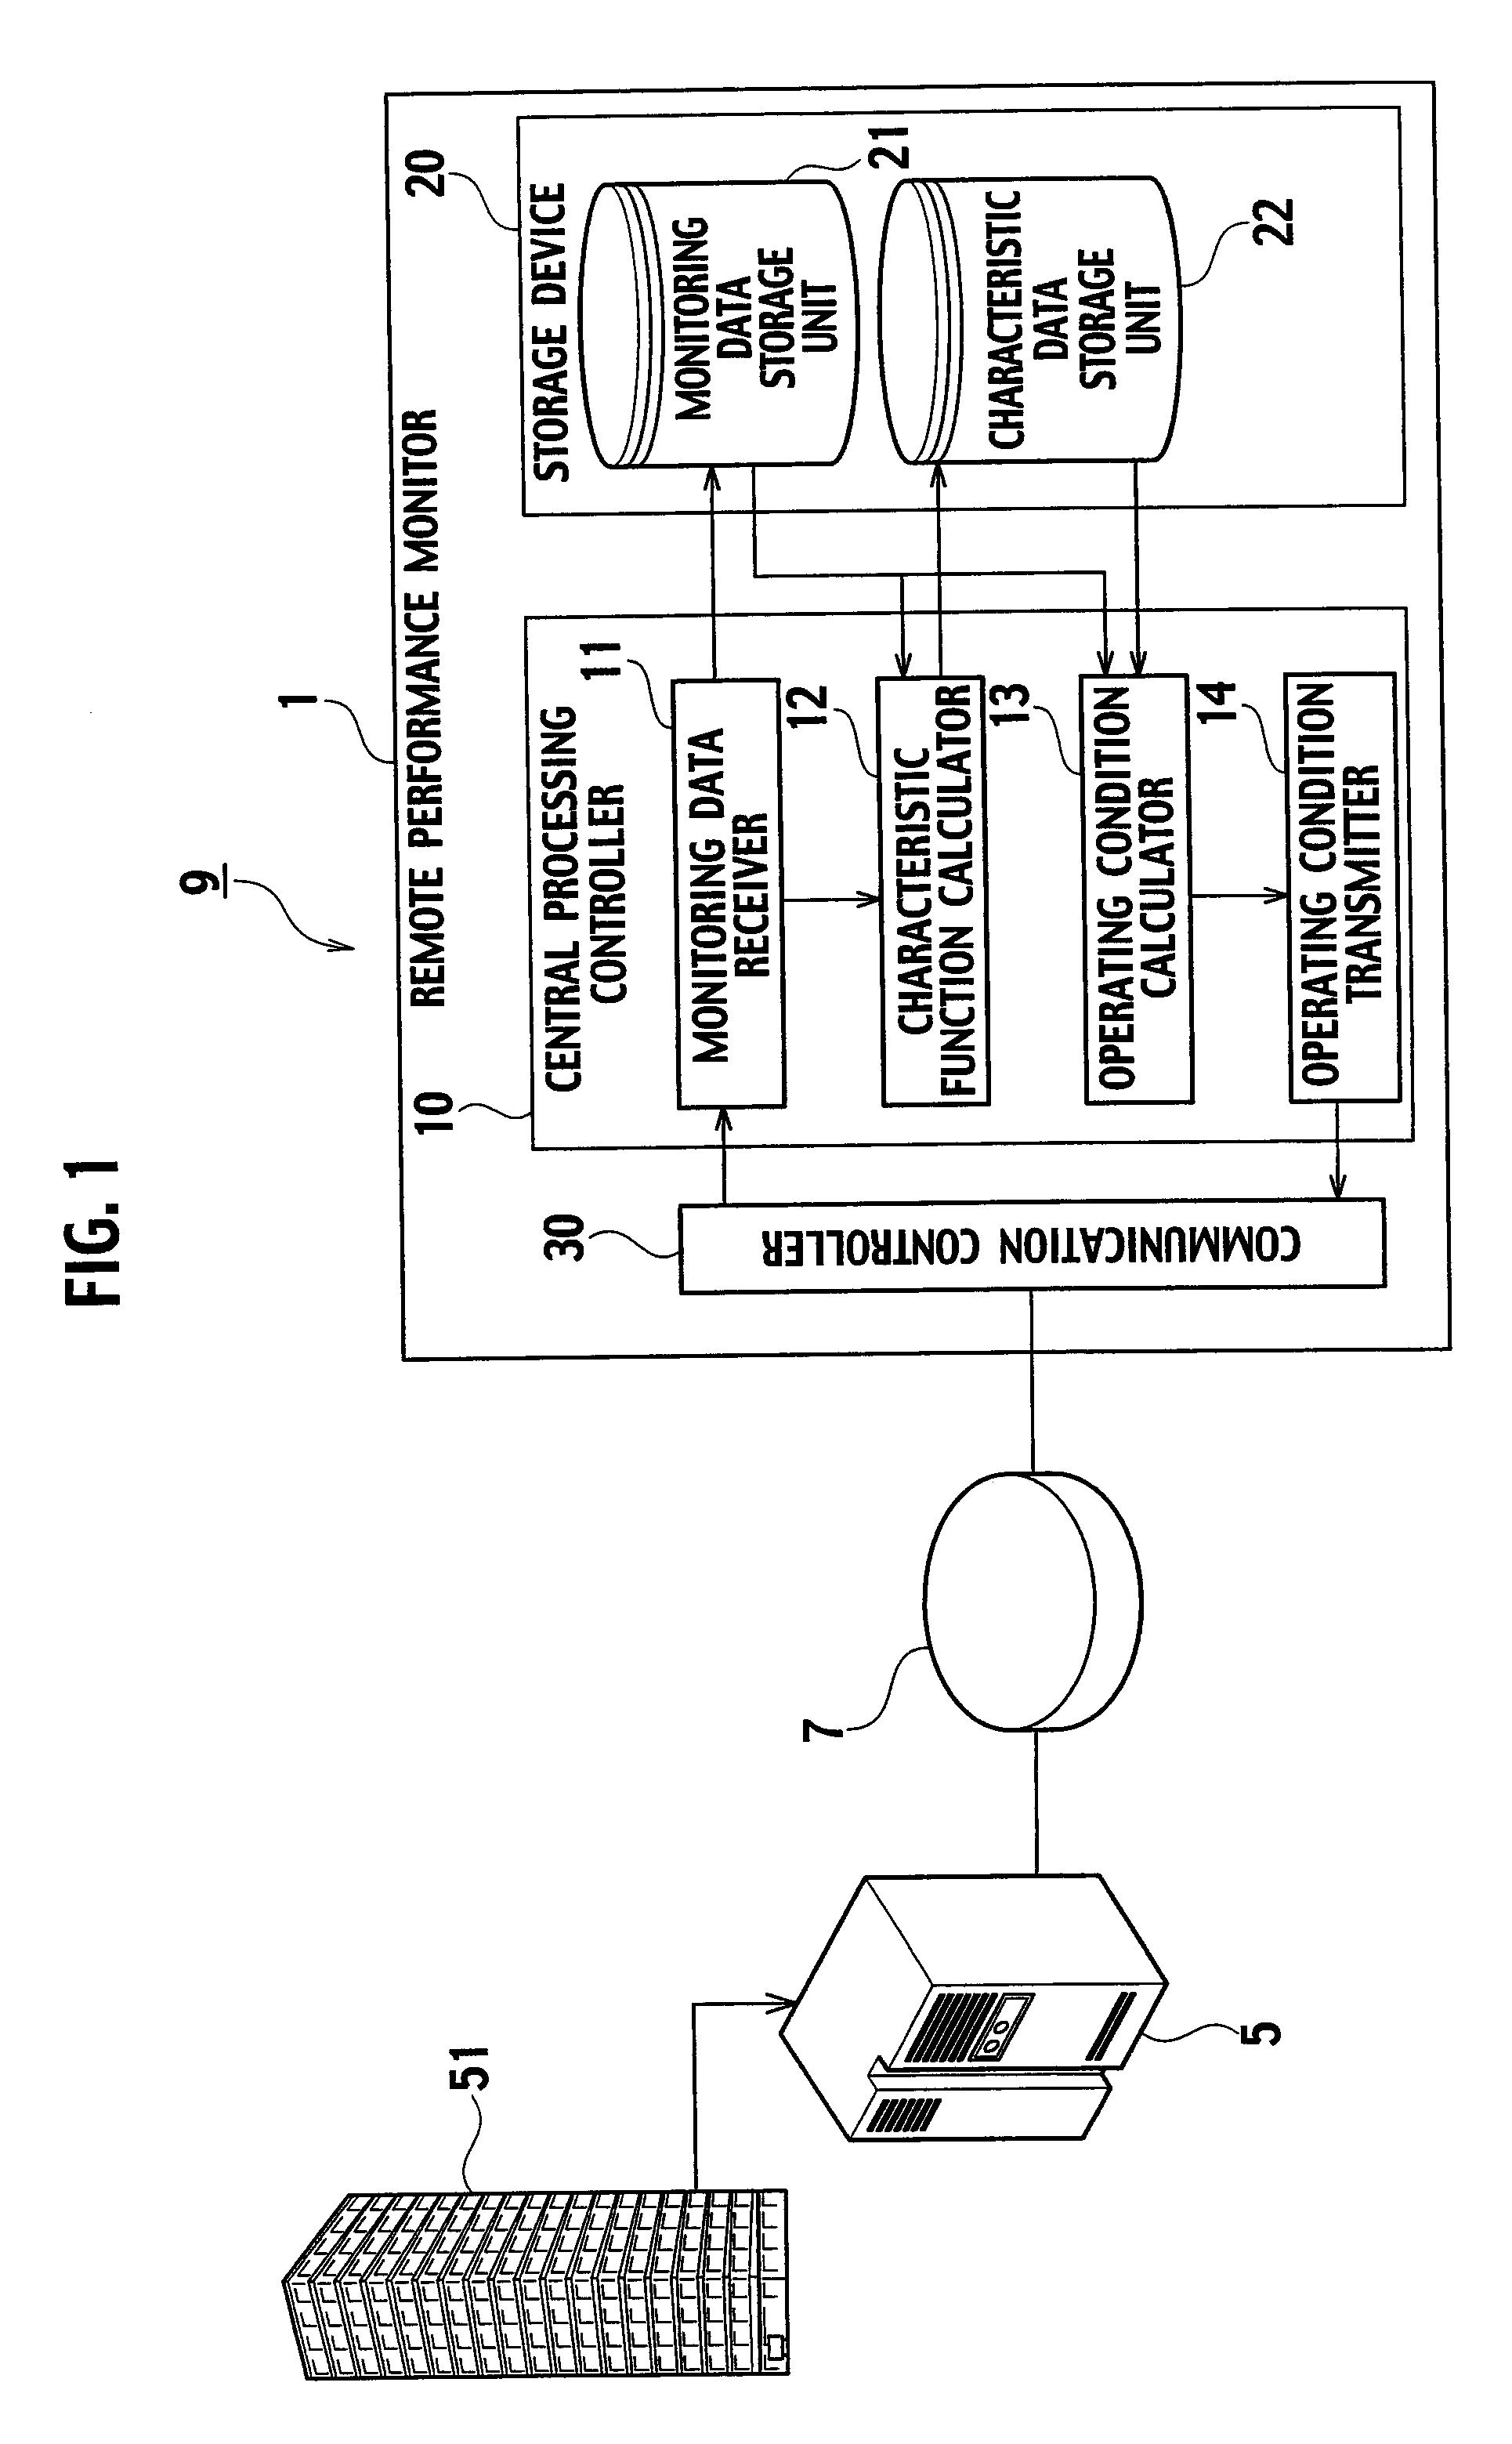 Remote Performance Monitor and Remote Performance Monitoring Method